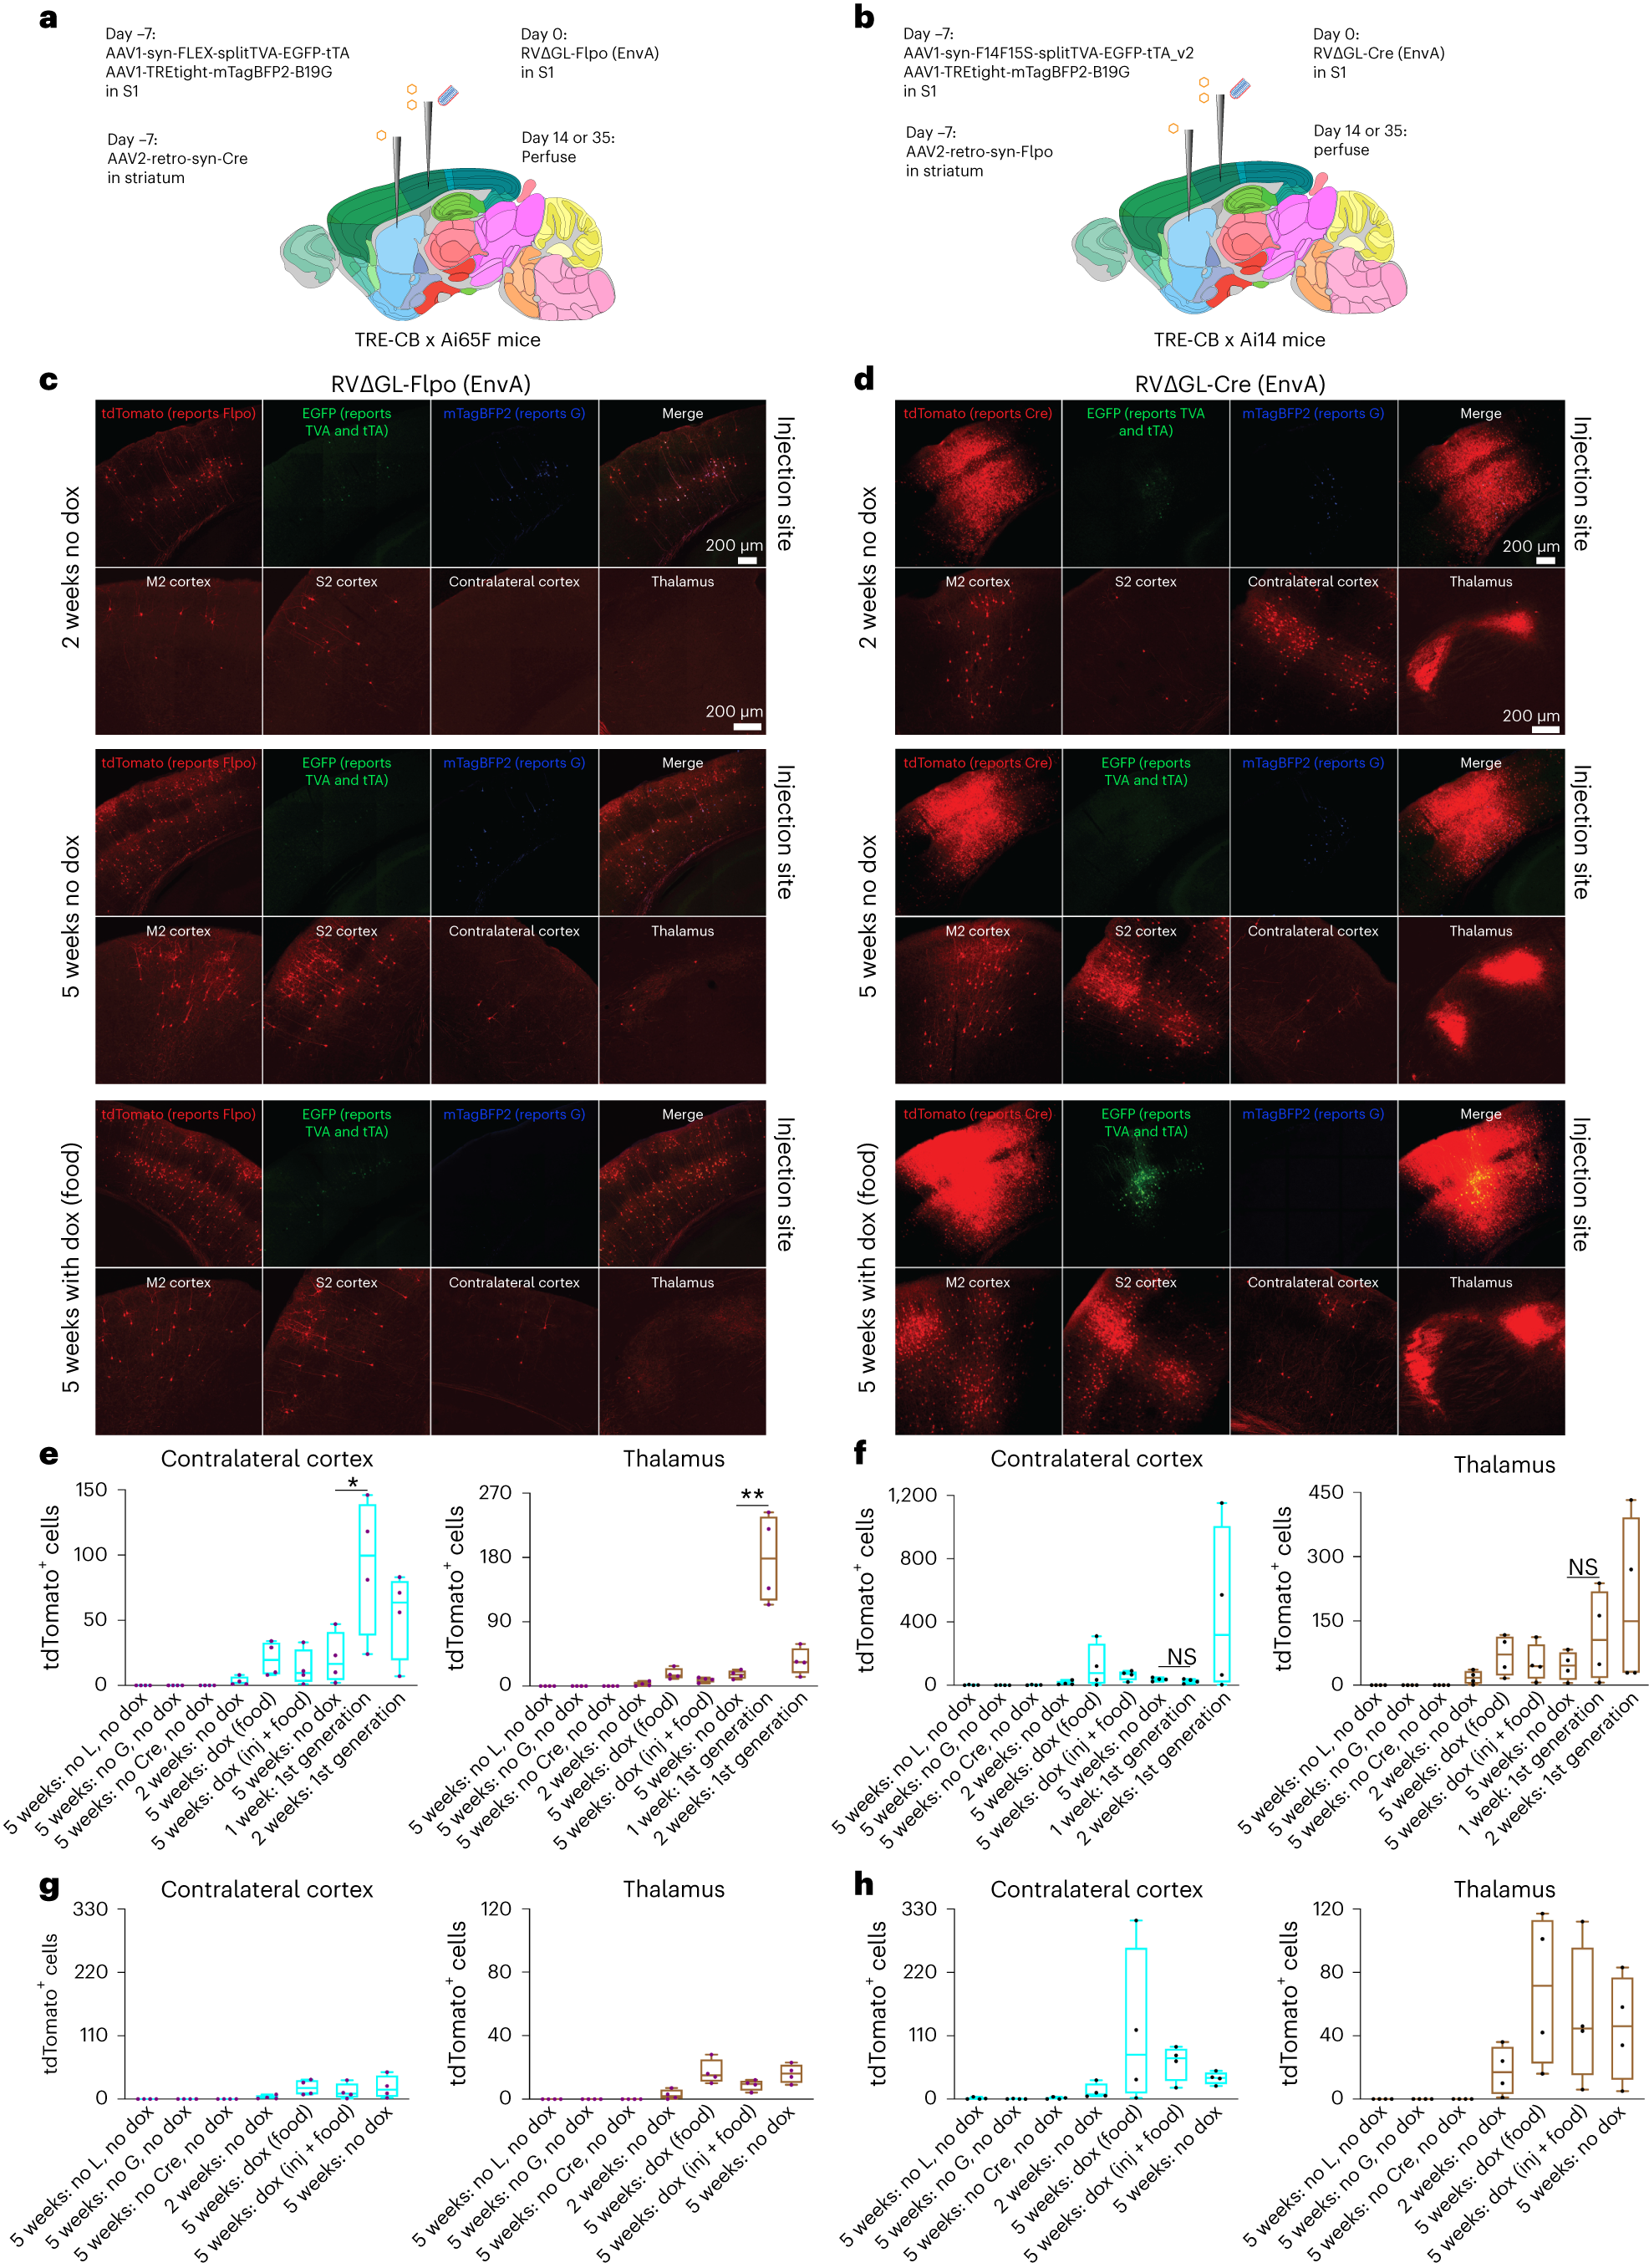 Long-term labeling and imaging of | neuronal viruses using rabies Nature synaptically vivo networks Neuroscience double-deletion-mutant connected in